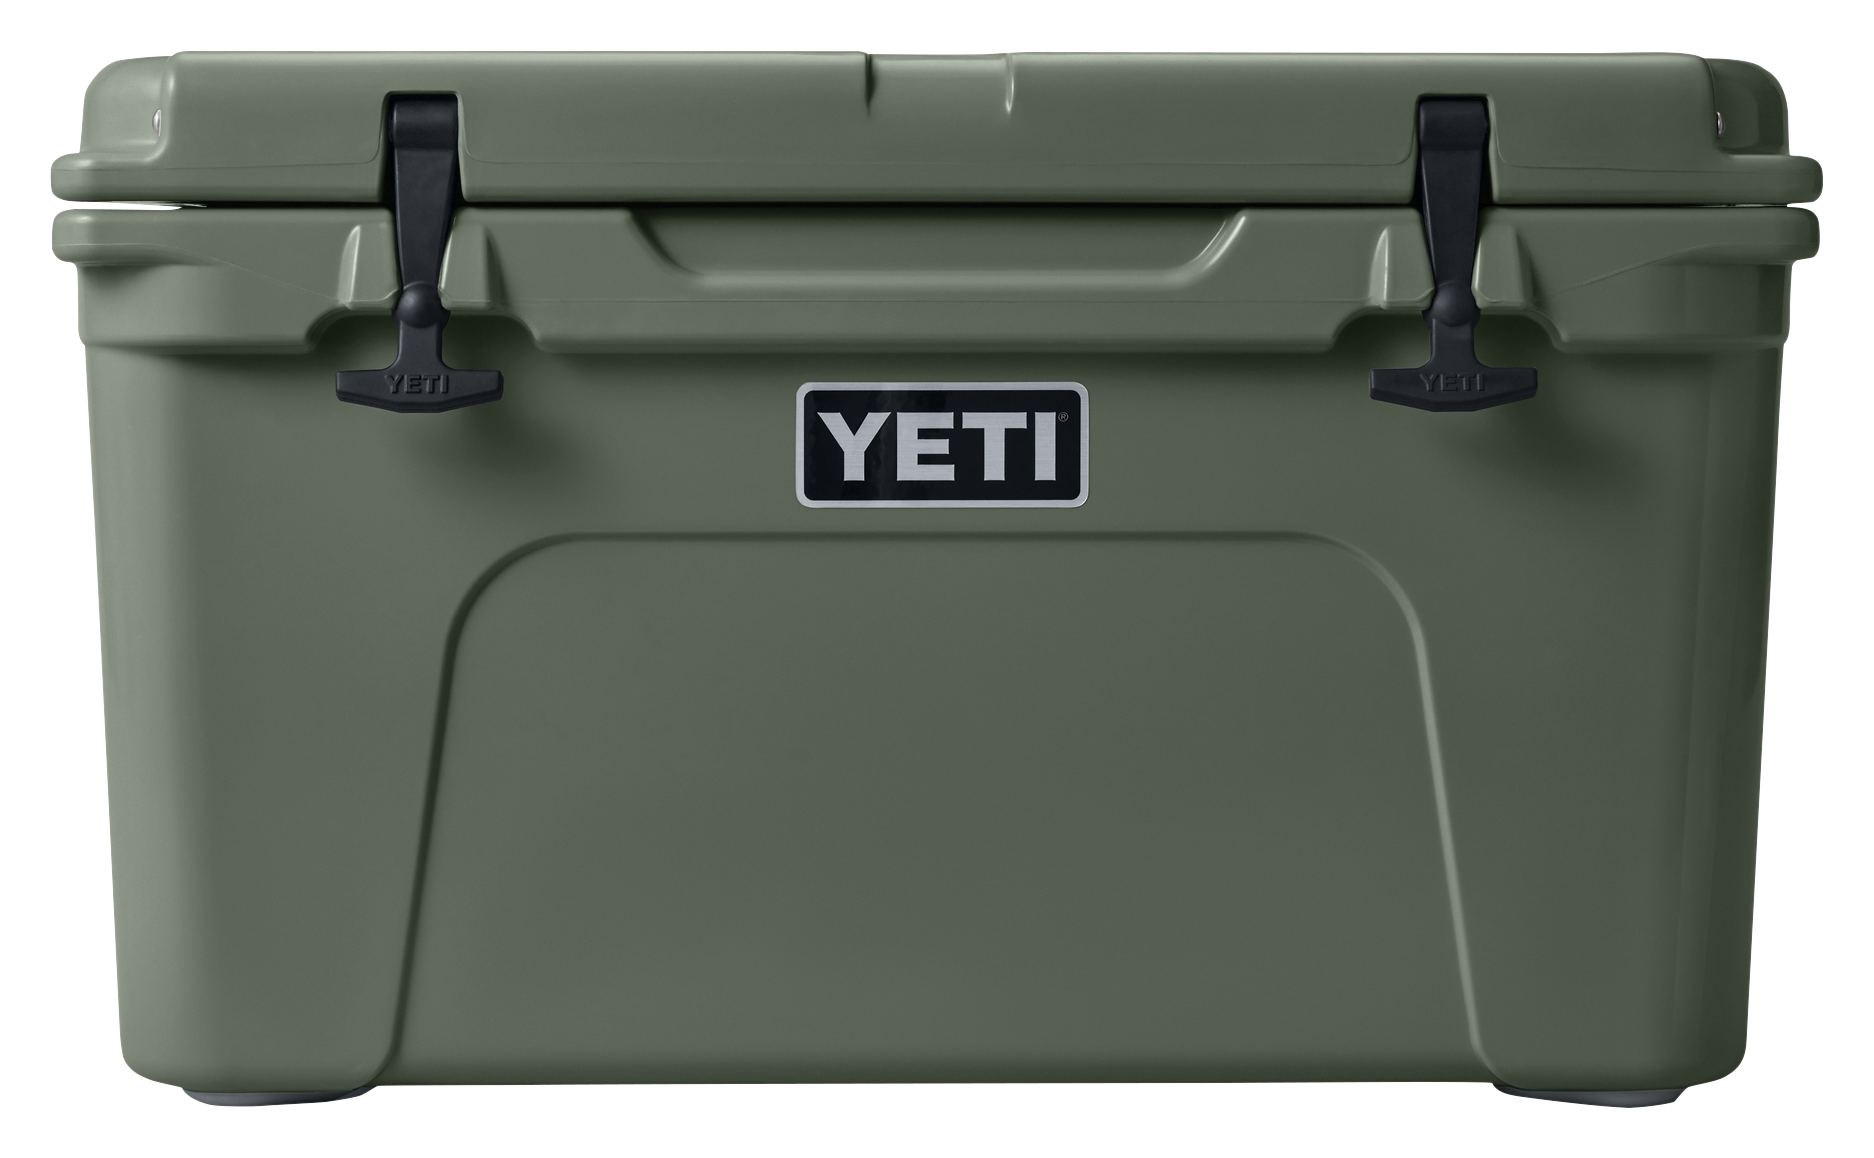 Yeti Cooler Sale: Save 25% off Select Yeti Coolers